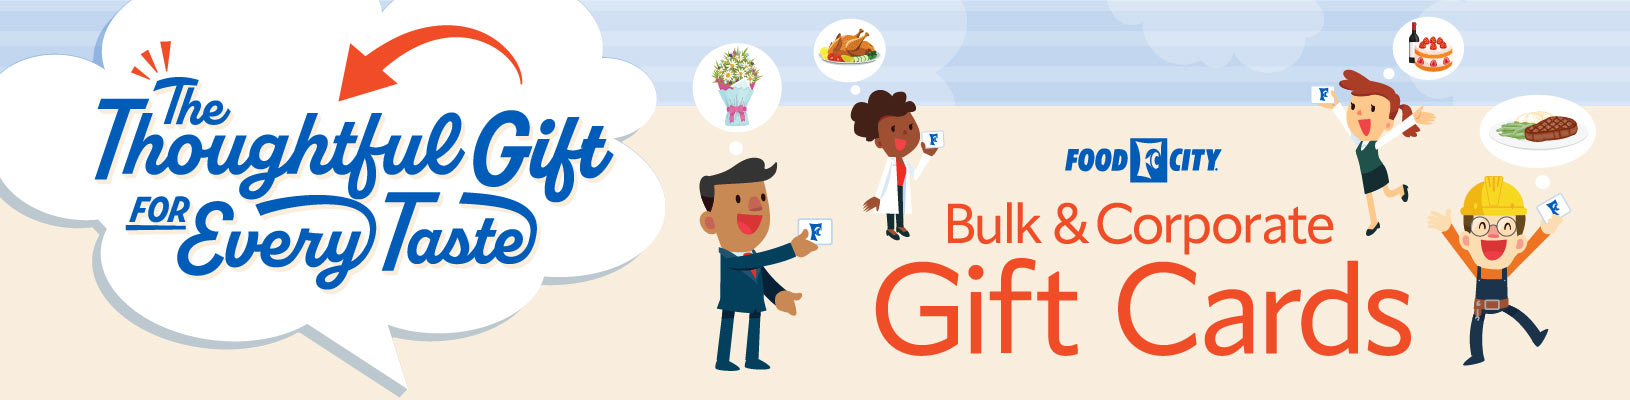 Looking for the perfect employee or large group gift idea? Food City's bulk and corporate gift card program is your answer!